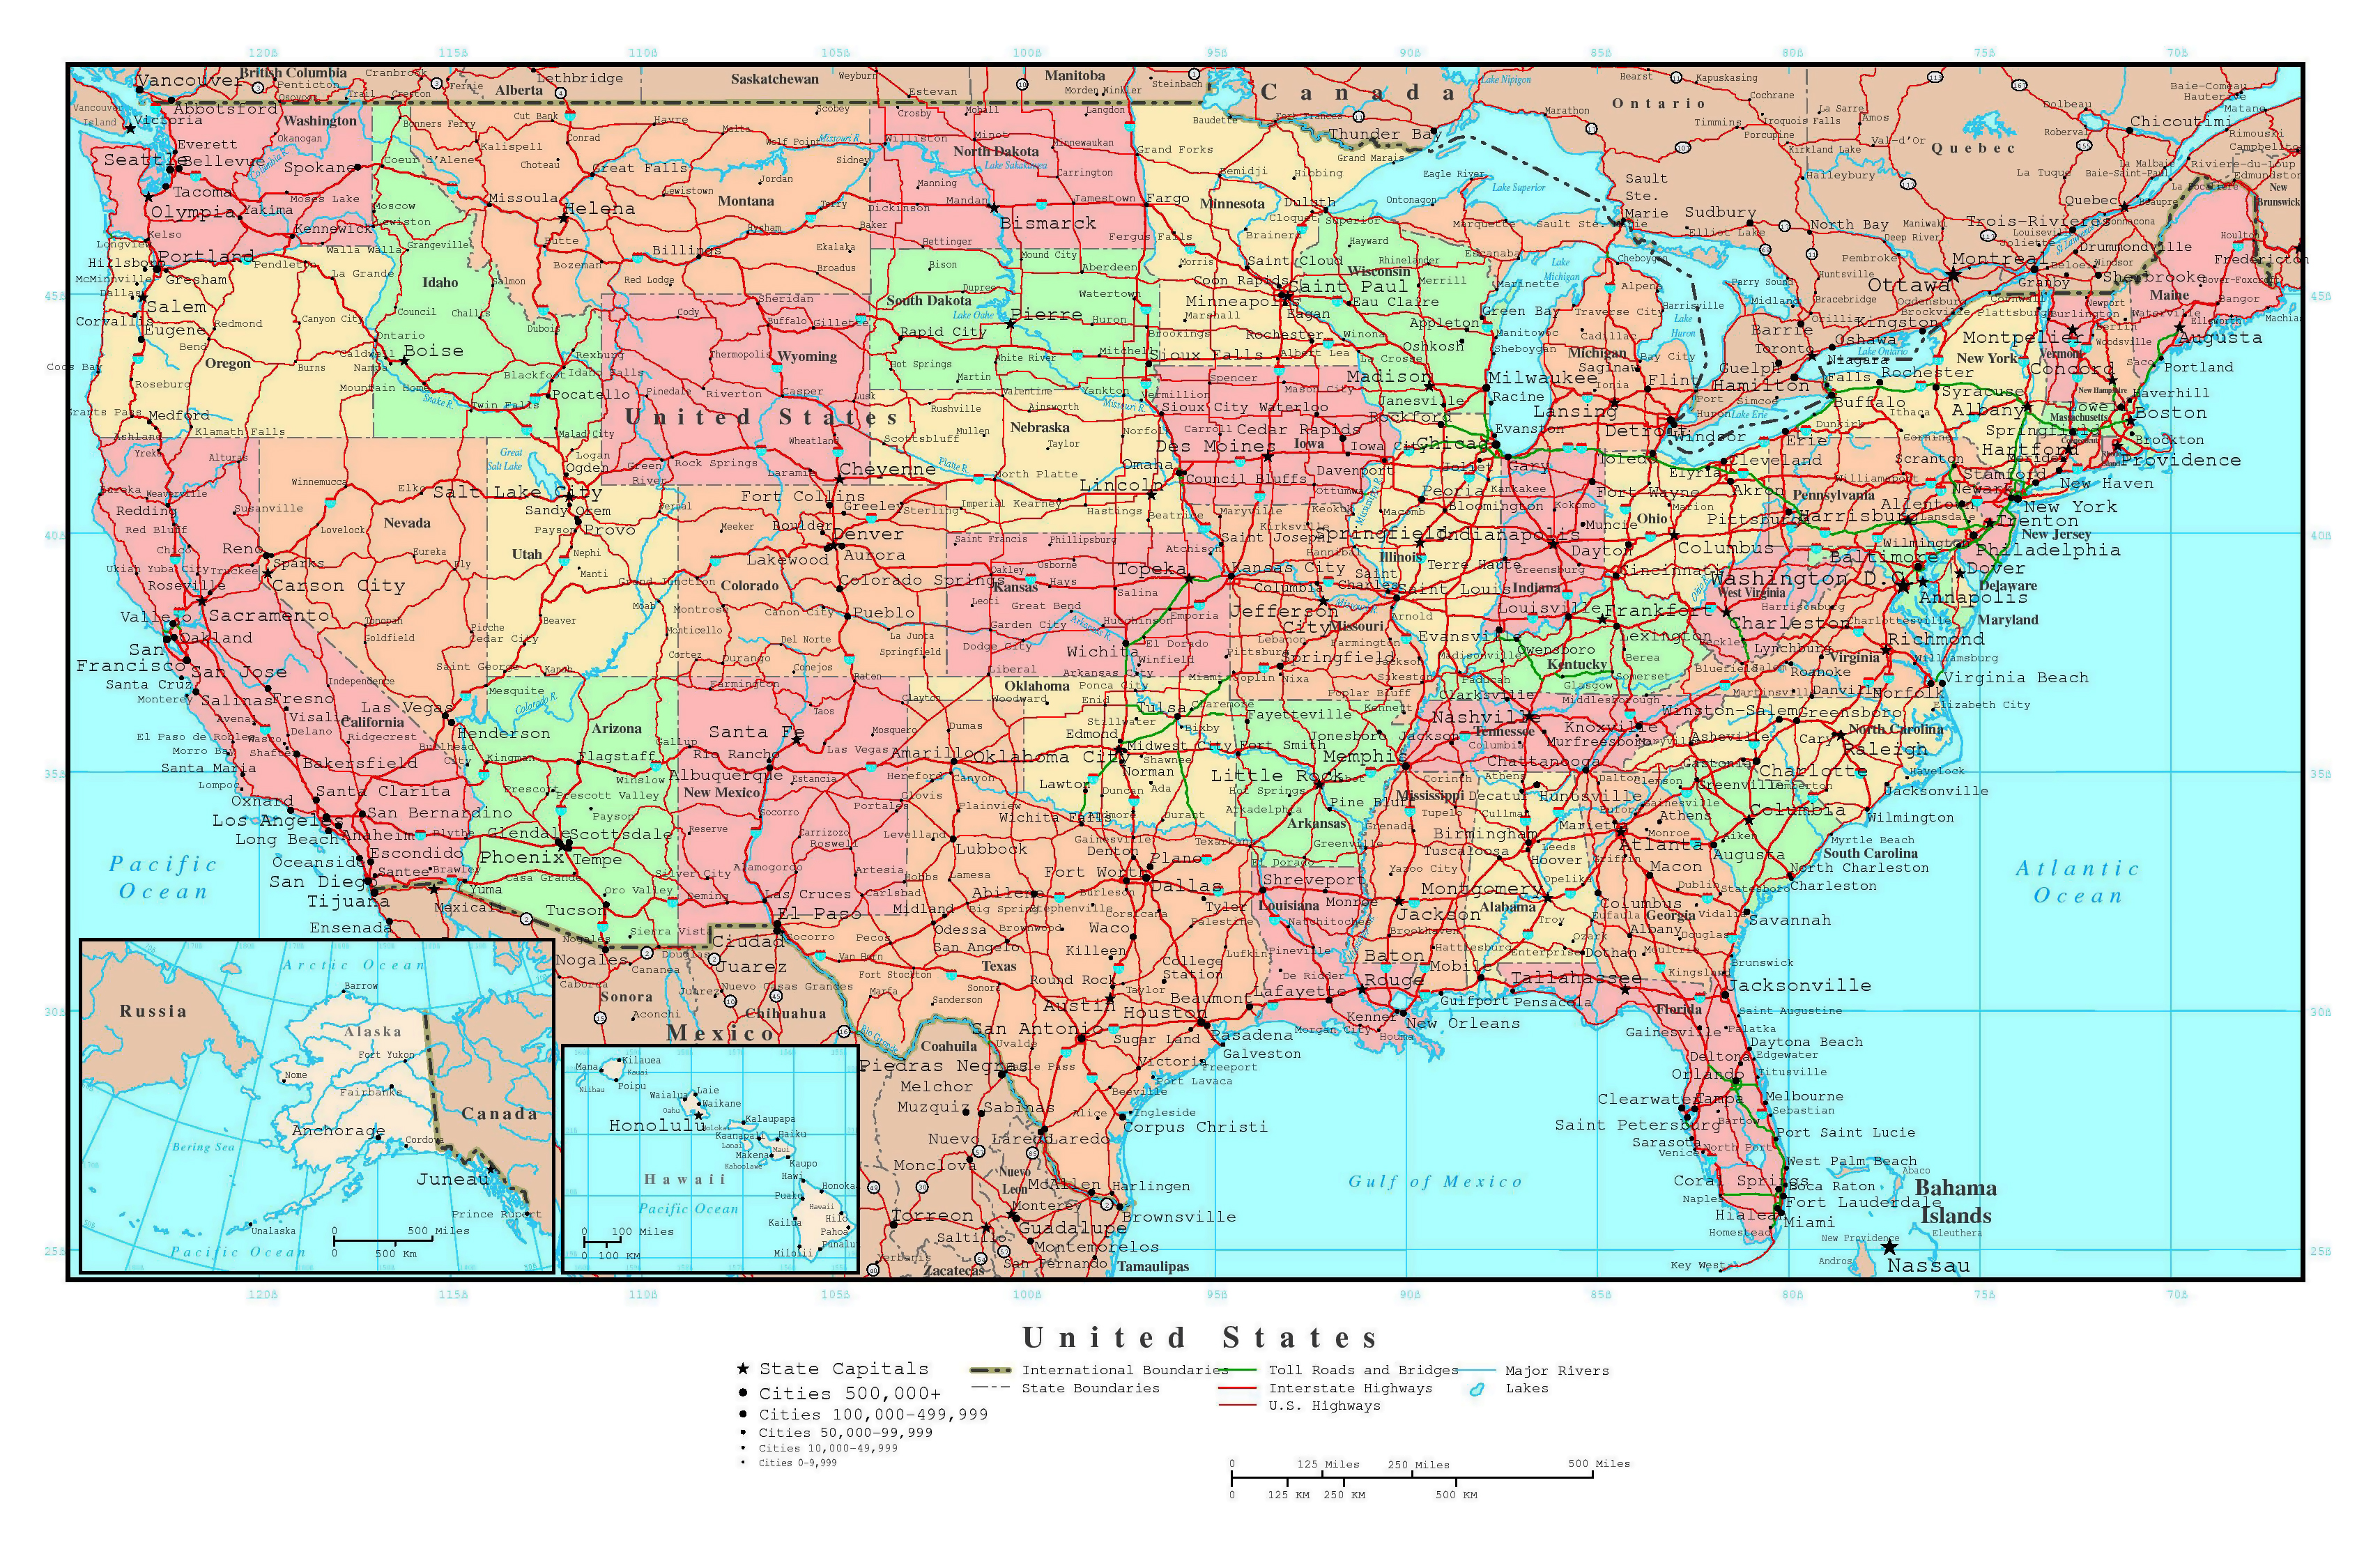 political map of usa with major cities Large Detailed Political And Administrative Map Of The Usa With Highways And Major Cities Usa Maps Of The Usa Maps Collection Of The United States Of America political map of usa with major cities